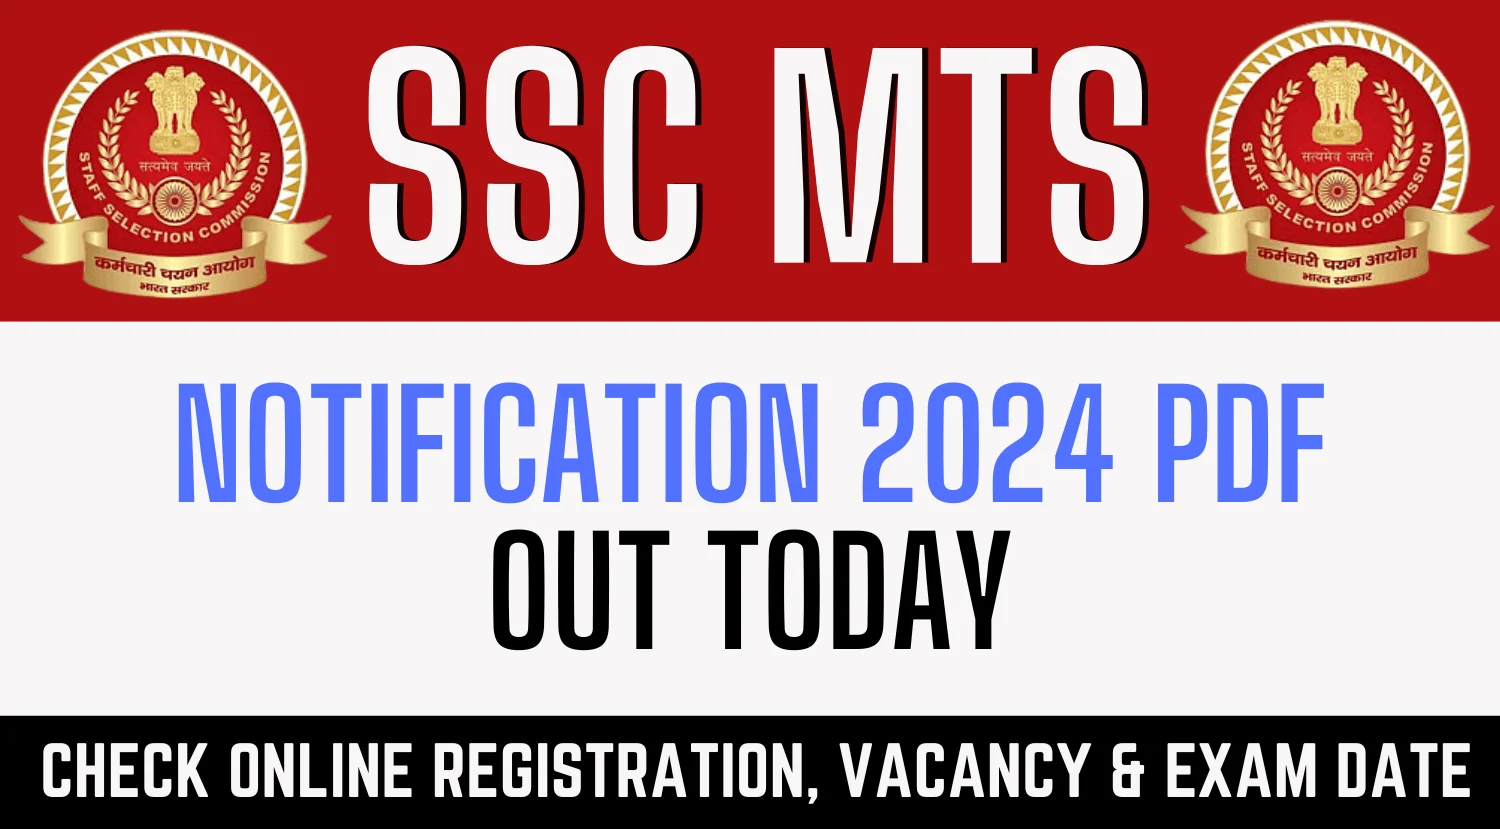 SSC MTS Notification 2024 PDF Out Today Online Registration Vacancy Exam Date